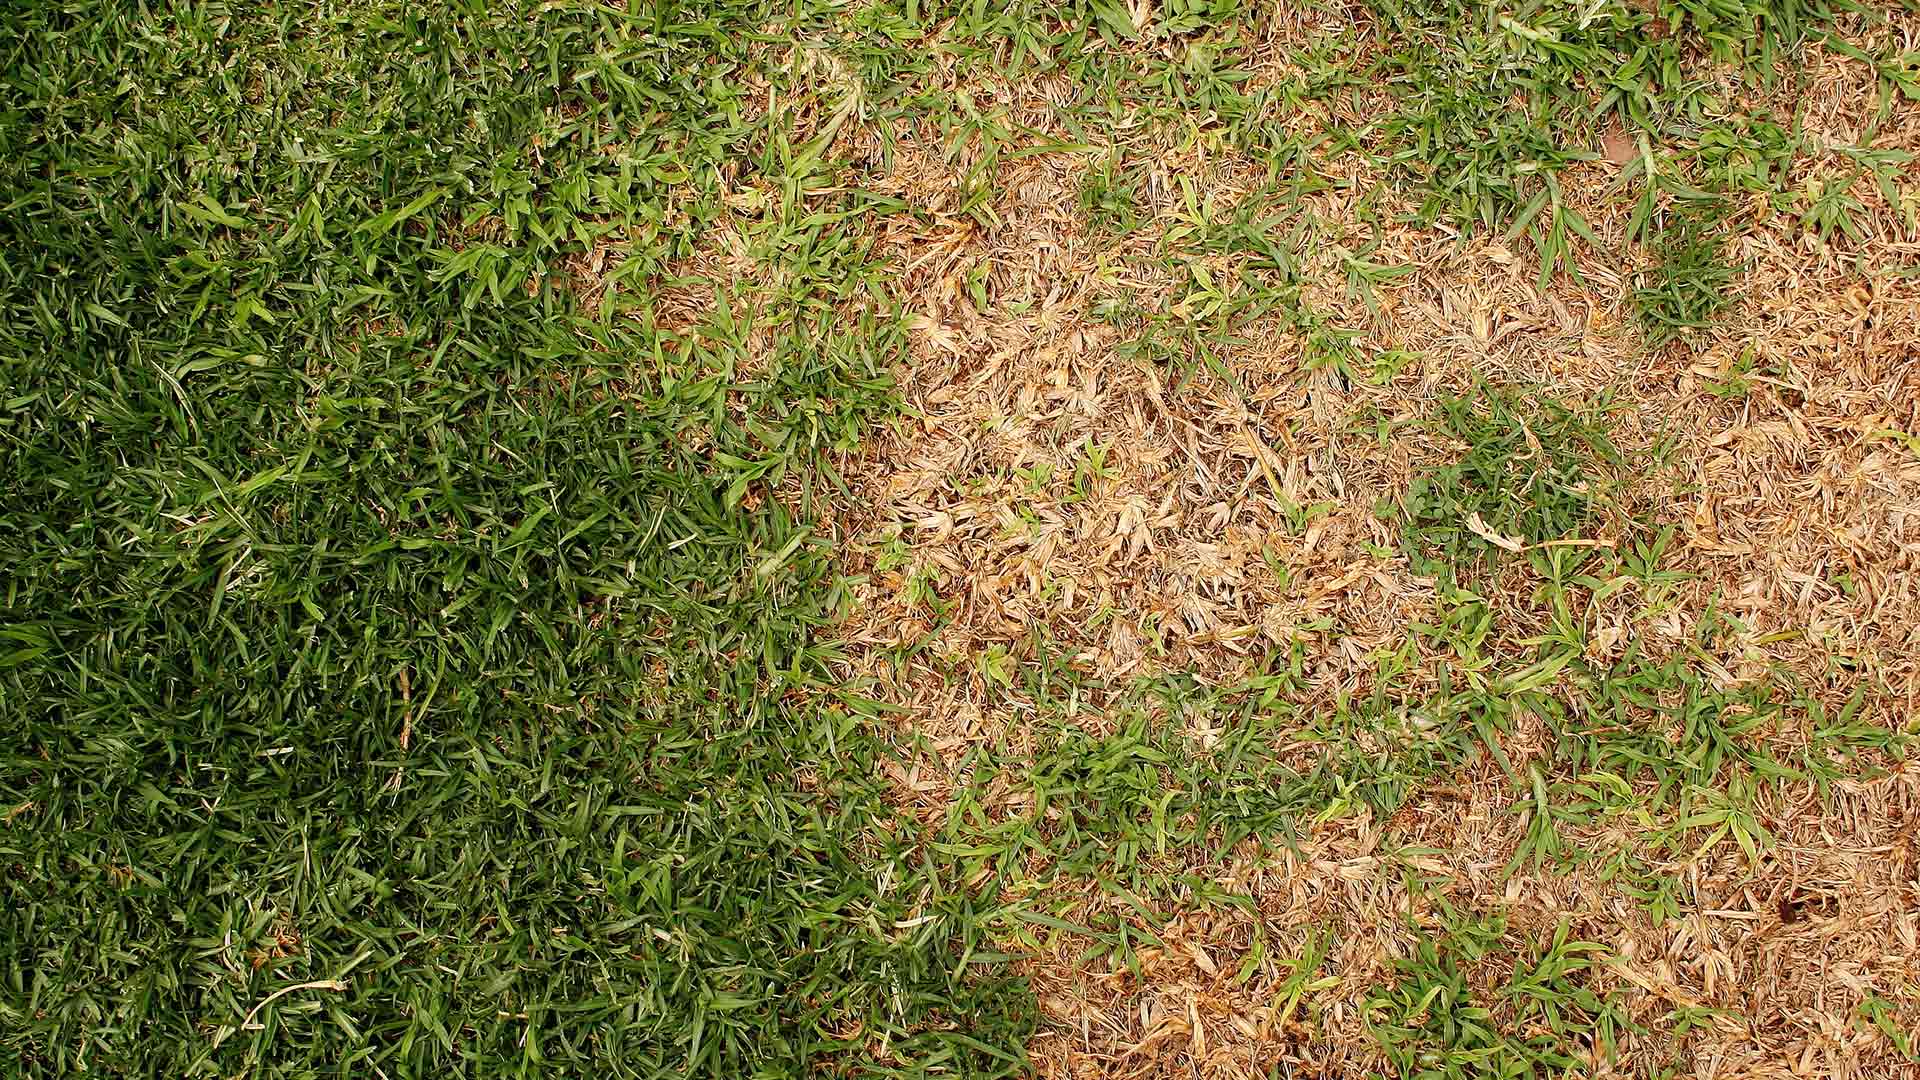 Suspect Your Lawn Has Fallen Victim to Brown Patch? Here’s What to Do